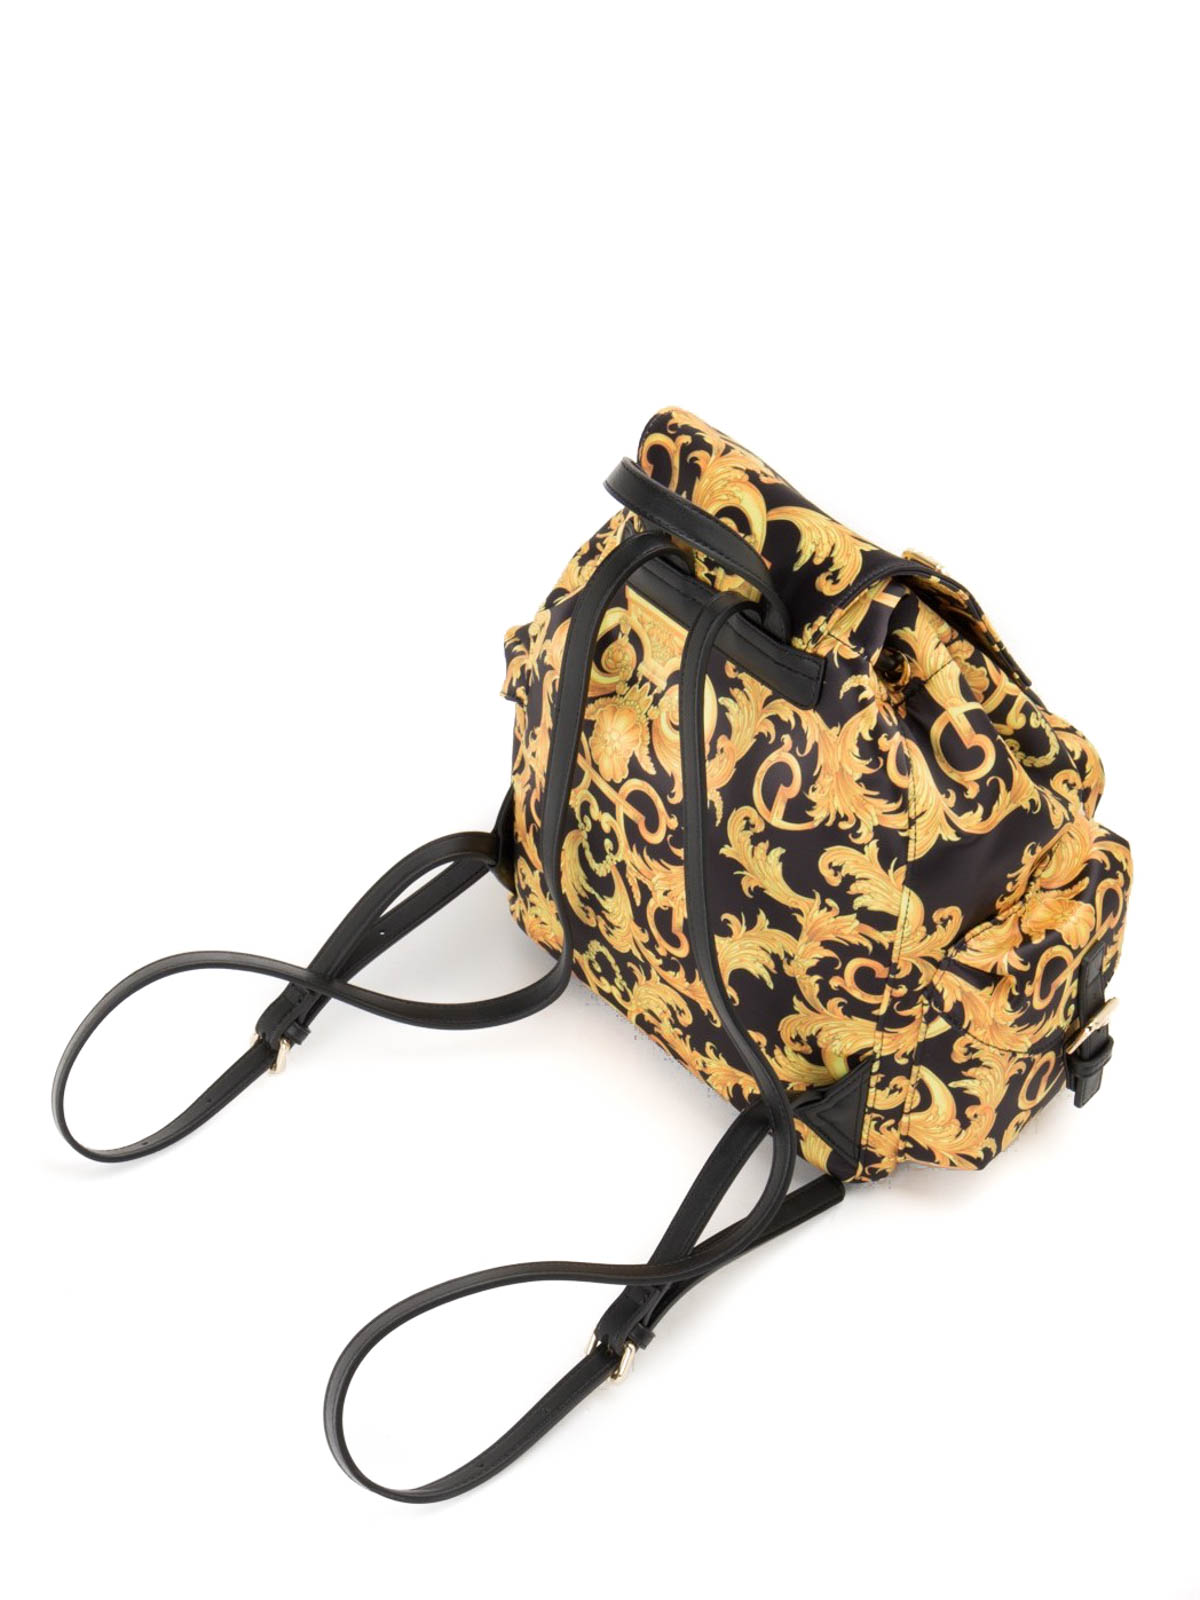 baroque print backpack versace jeans couture backpack, Louis Vuitton  Cruiser Travel bag 387067